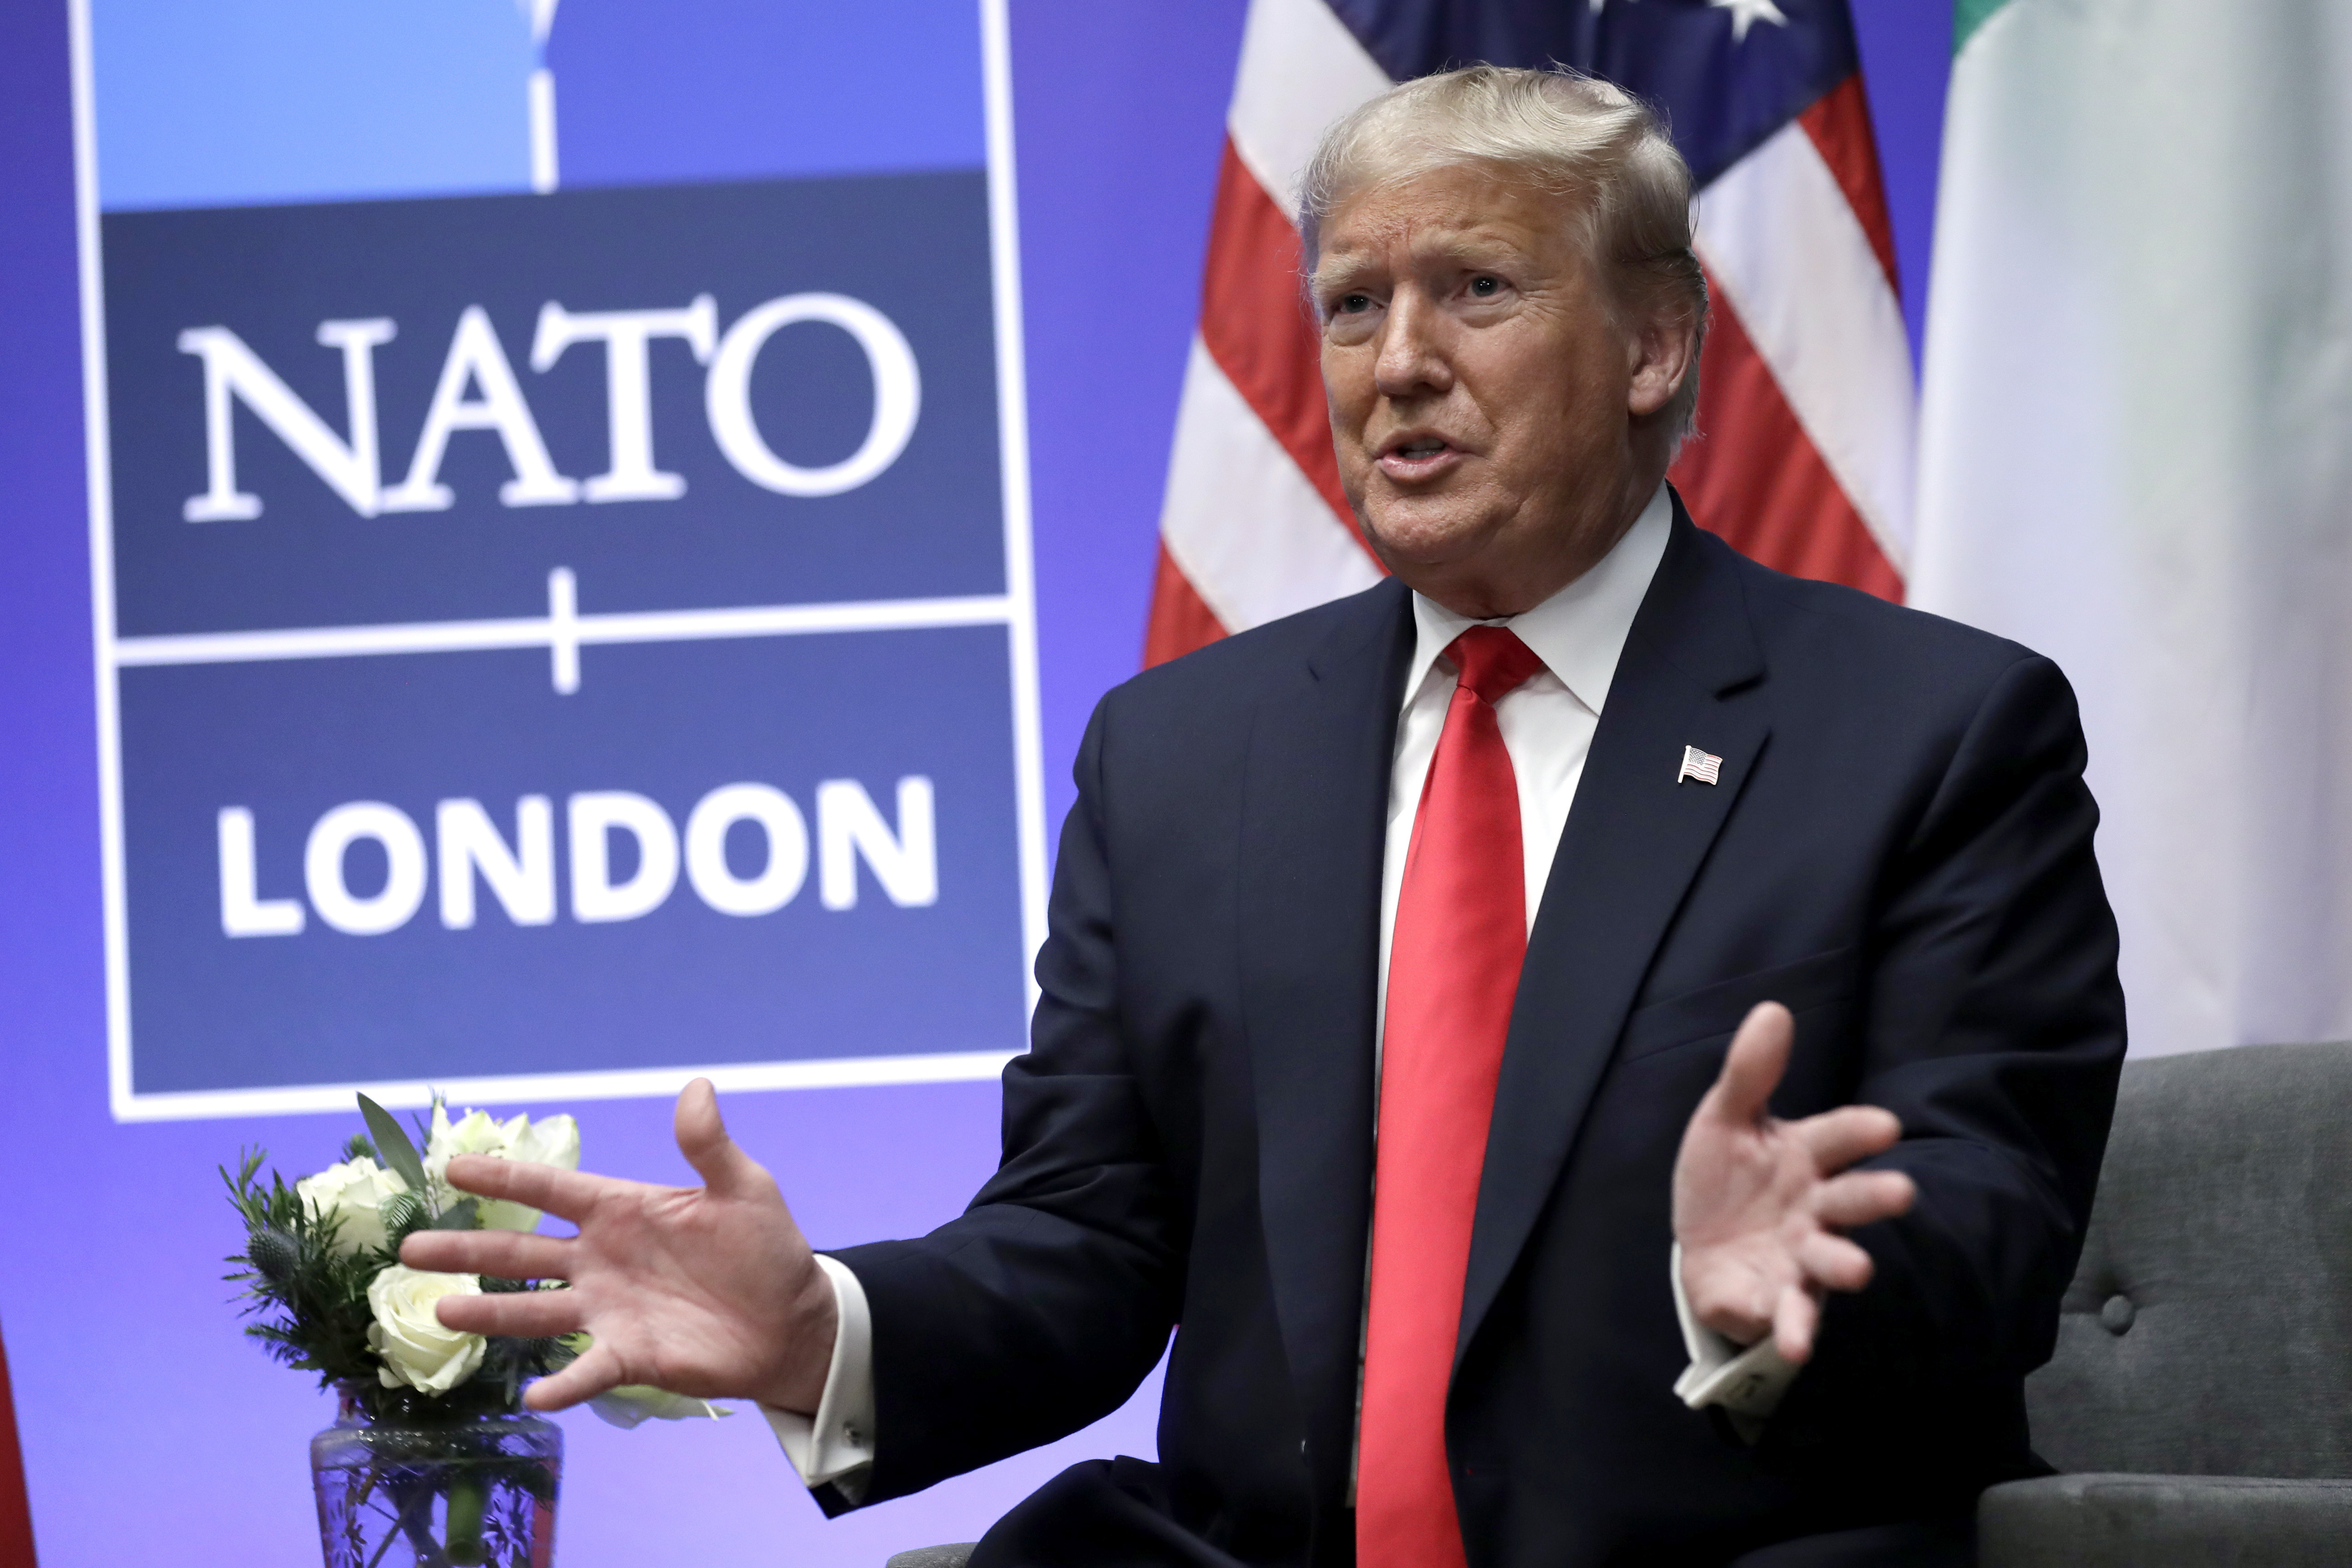 FILE - President Donald Trump speaks during the NATO summit, Dec. 4, 2019, in Watford, England. NATO allies are gathering in Washington for a summit this week, and the prospect that former President Trump, the military alliance's most prominent critic, may return to power is dominating discussions. President Joe Biden's shaky performance in the presidential debate last month escalated doubts about his reelection. It's given rise to the term "Trump-proofing" or "future-proofing" NATO, making the alliance more self-sufficient. (AP Photo/ Evan Vucci, File)